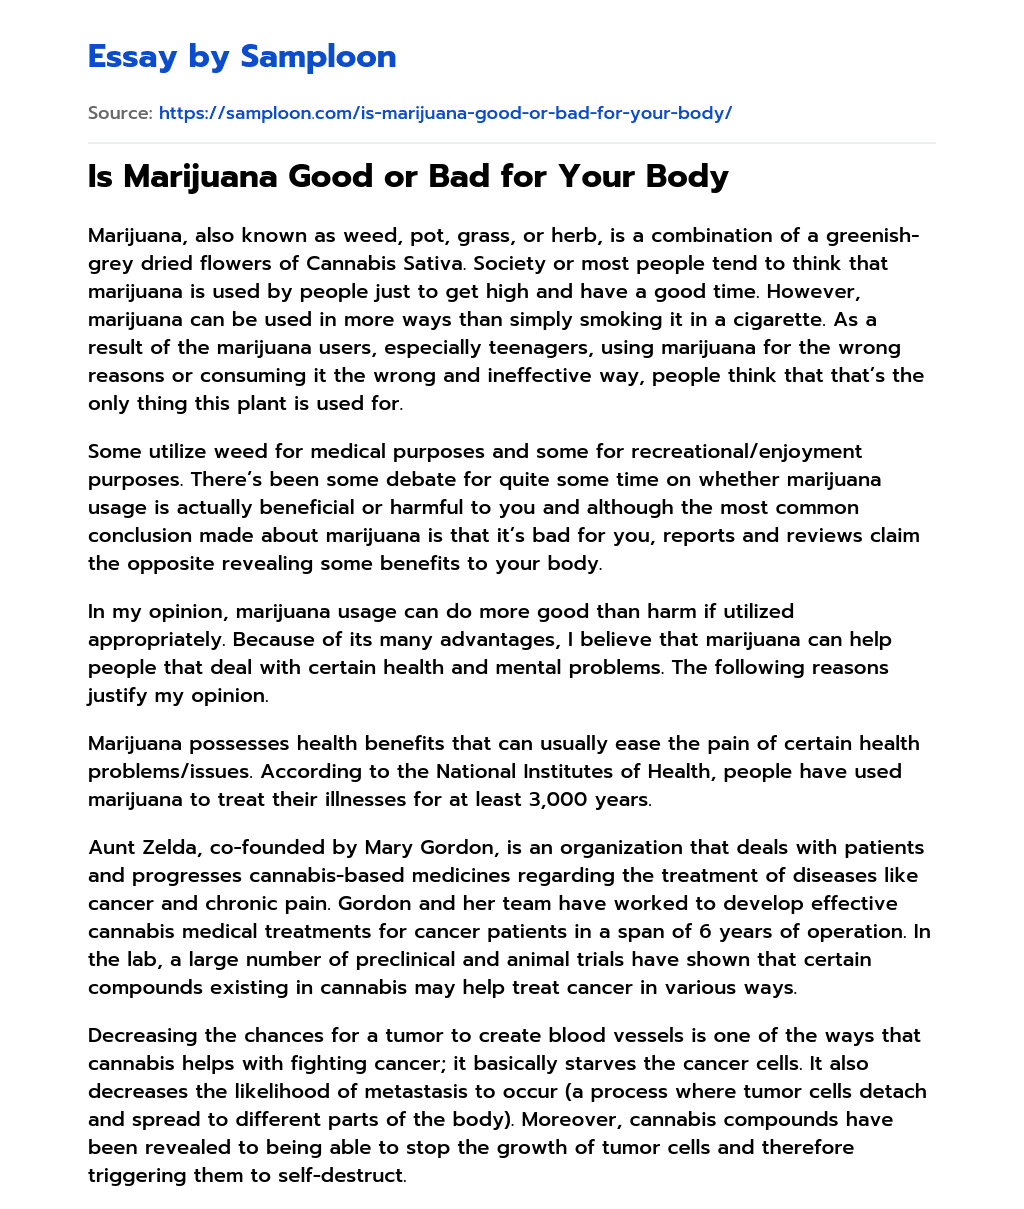 Is Marijuana Good or Bad for Your Body essay